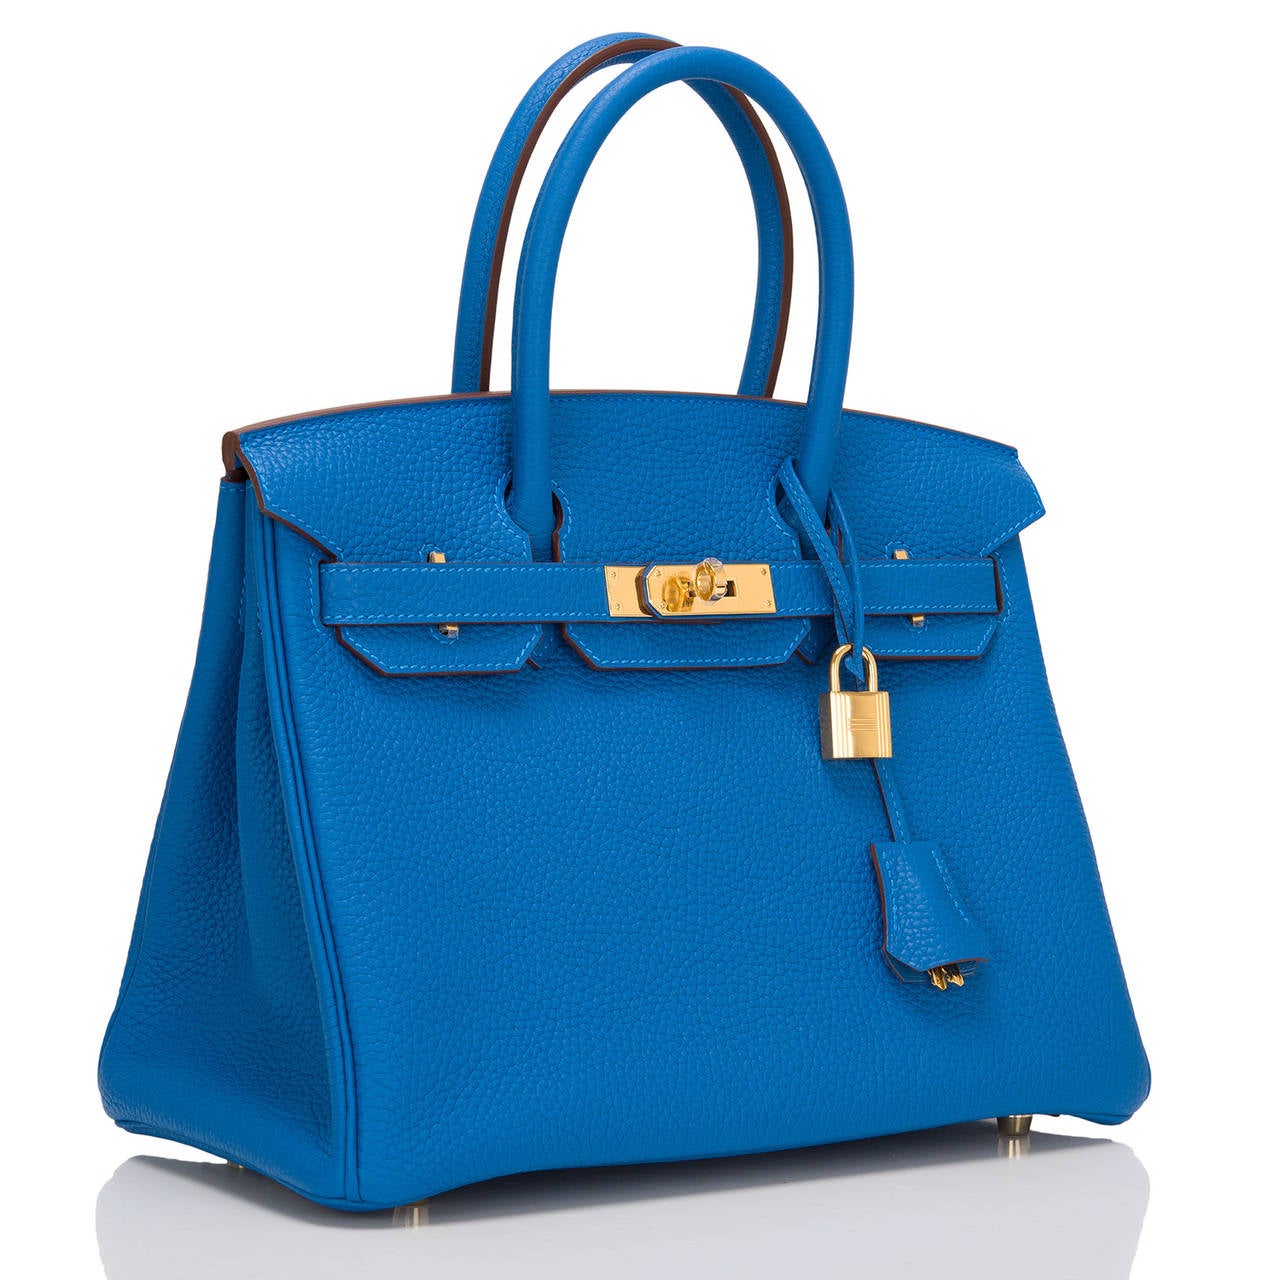 Hermes Mykonos Birkin 30cm in clemence leather with gold hardware.

This Birkin features tonal stitching, front toggle closure, clochette with lock and two keys, and double rolled handles.The interior is lined in Mykonos chevre with one zip pocket